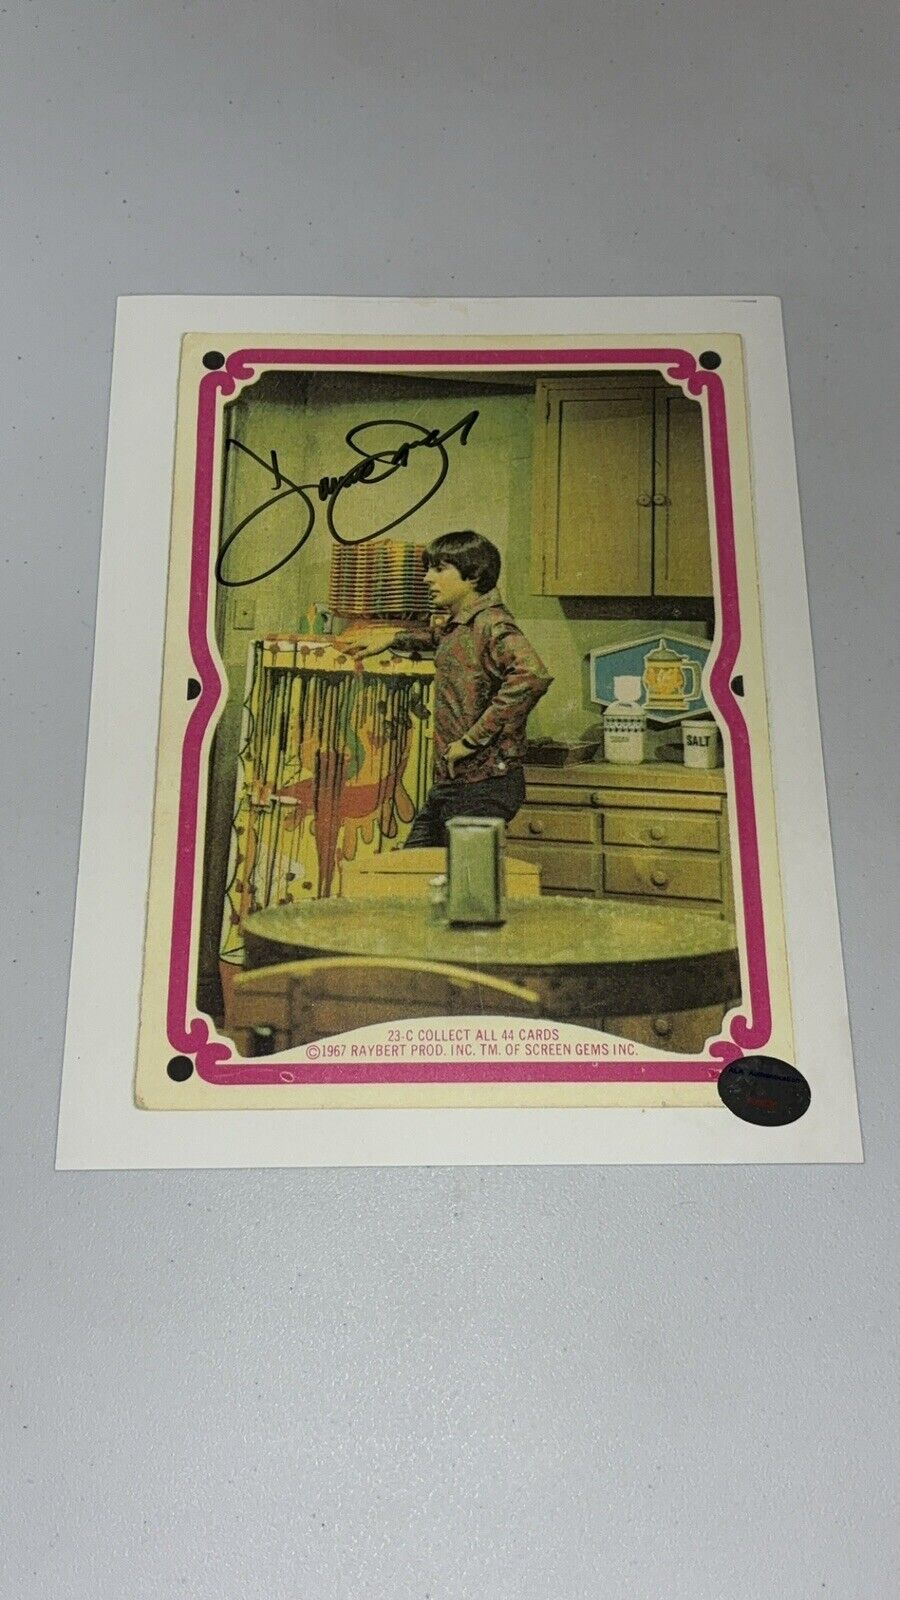 1967 Raybert The Monkees #23C Davy Jones with Autograph Signed Photo Card w/ COA